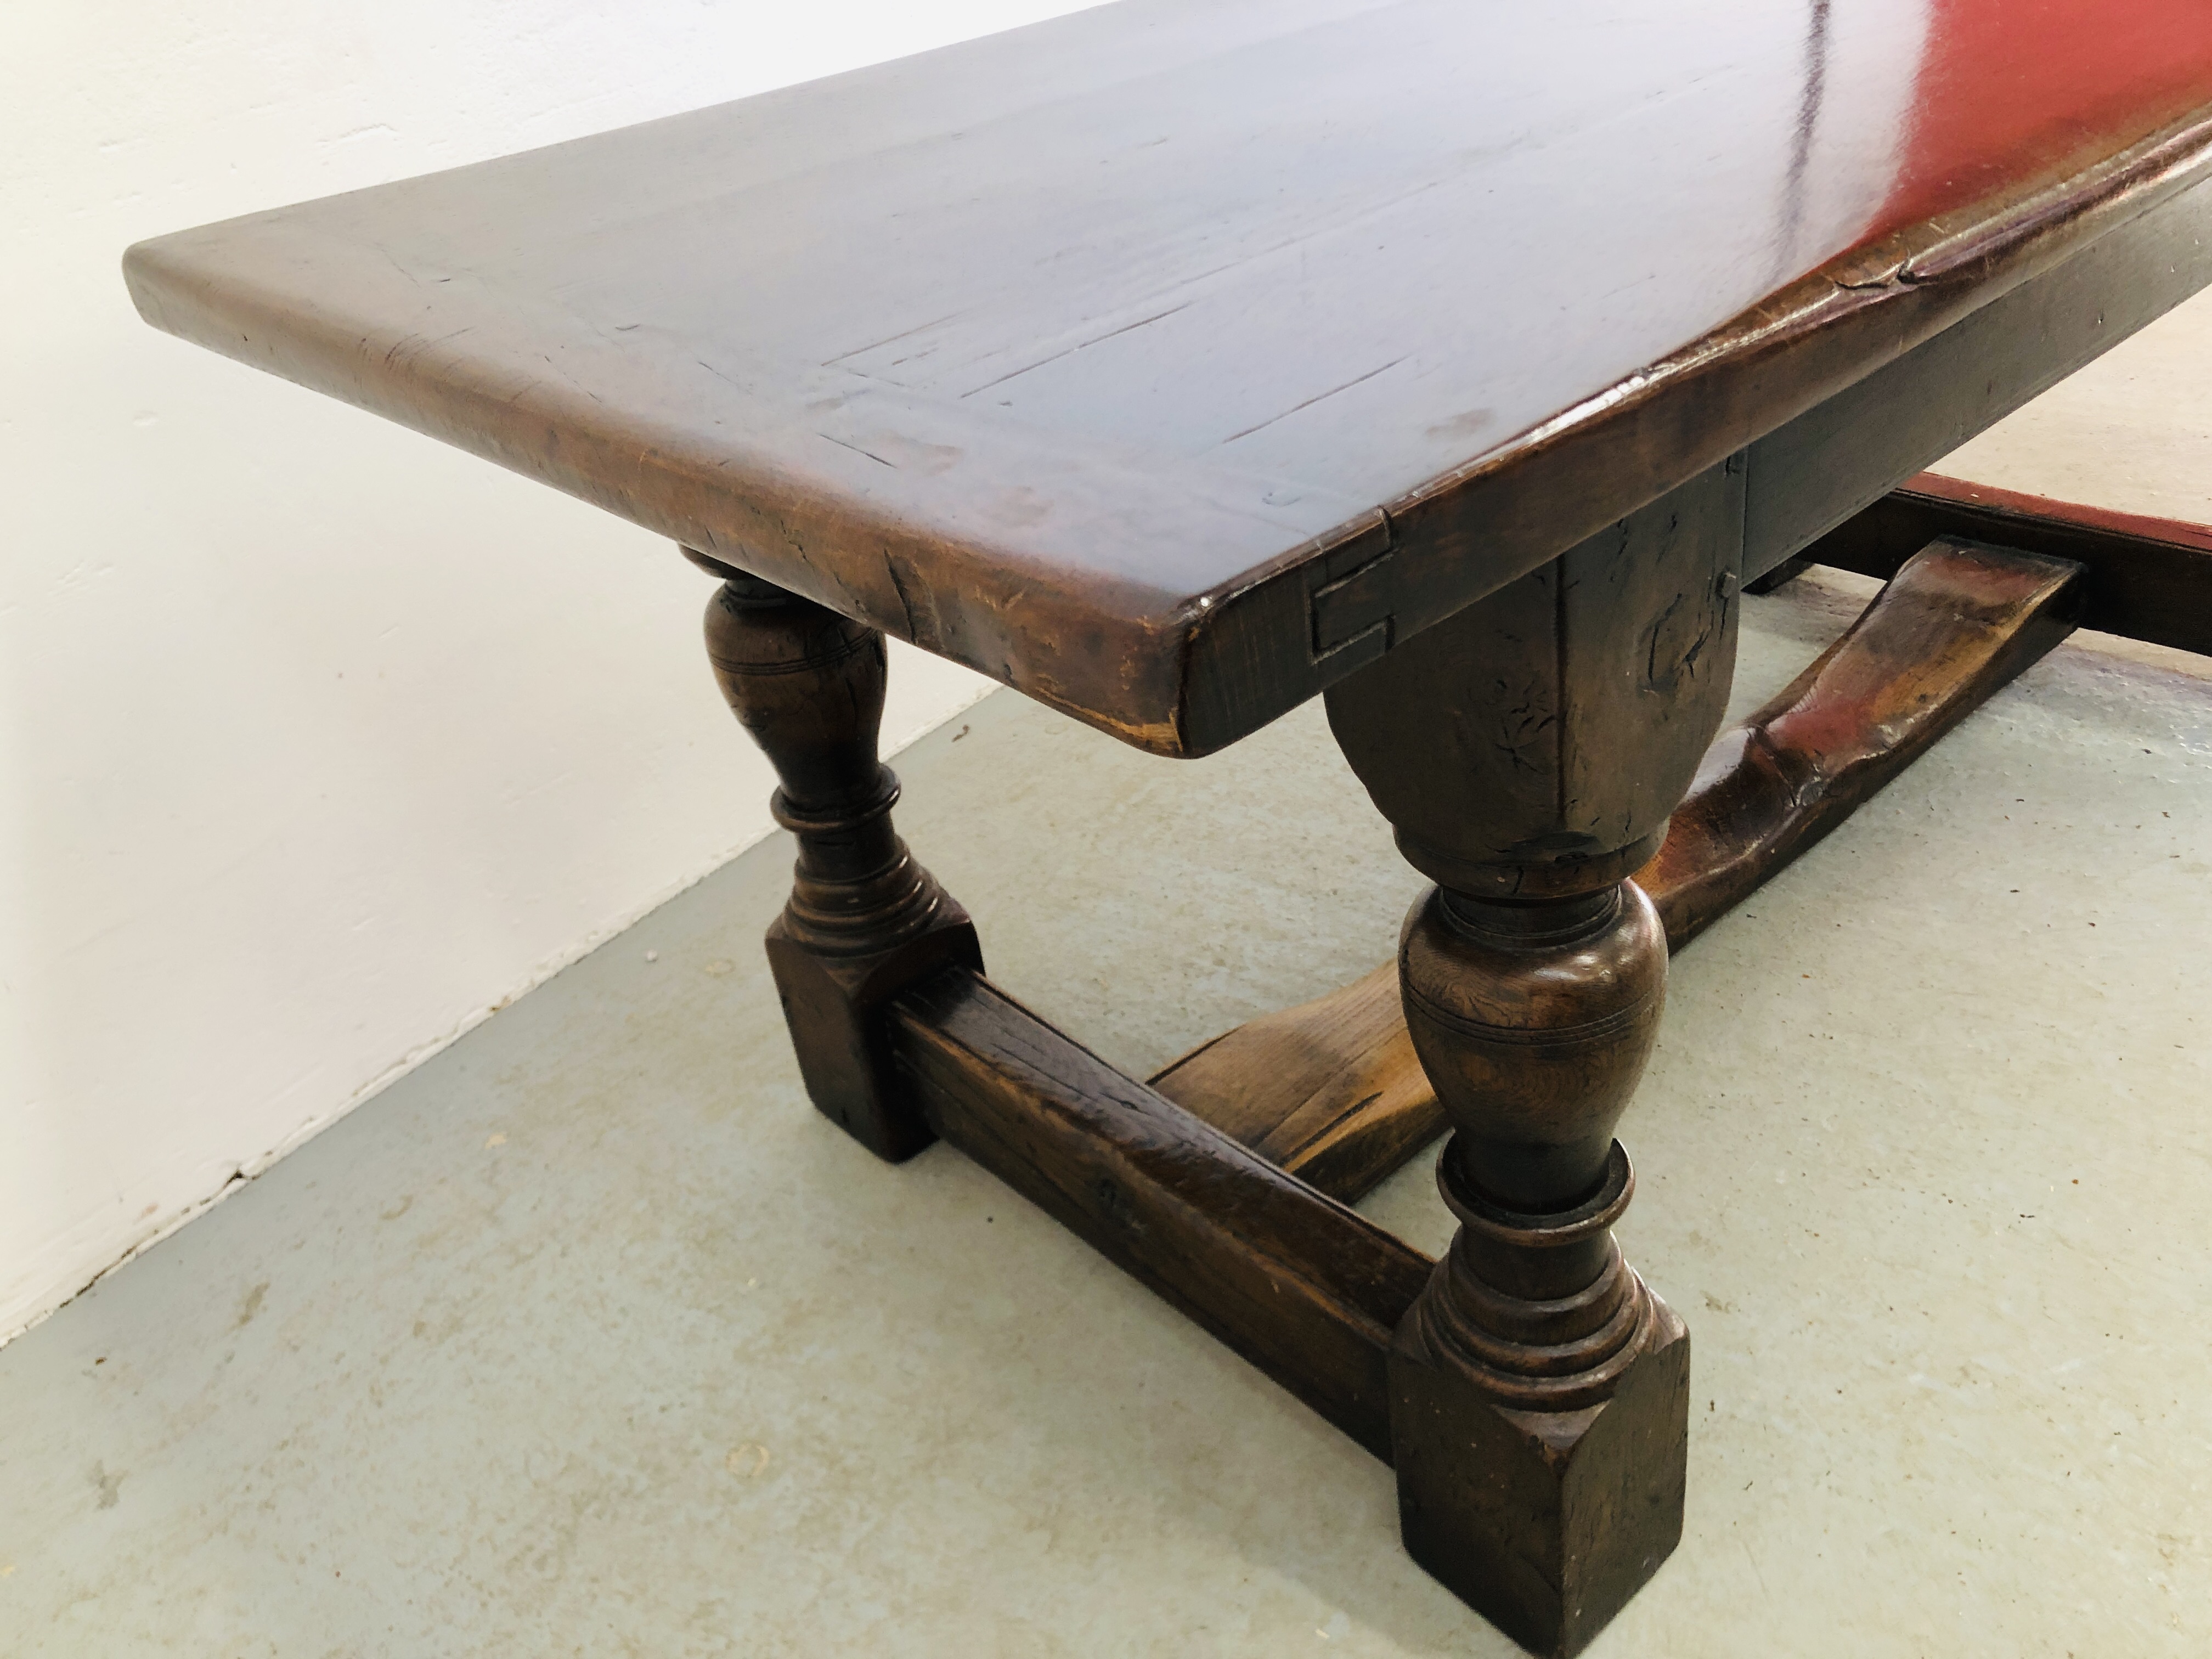 A SOLID OAK REFECTORY STYLE DINING TABLE BESPOKE MADE BY GERRY WIER WITH OAK SOURCED FROM DERBY - Image 9 of 11